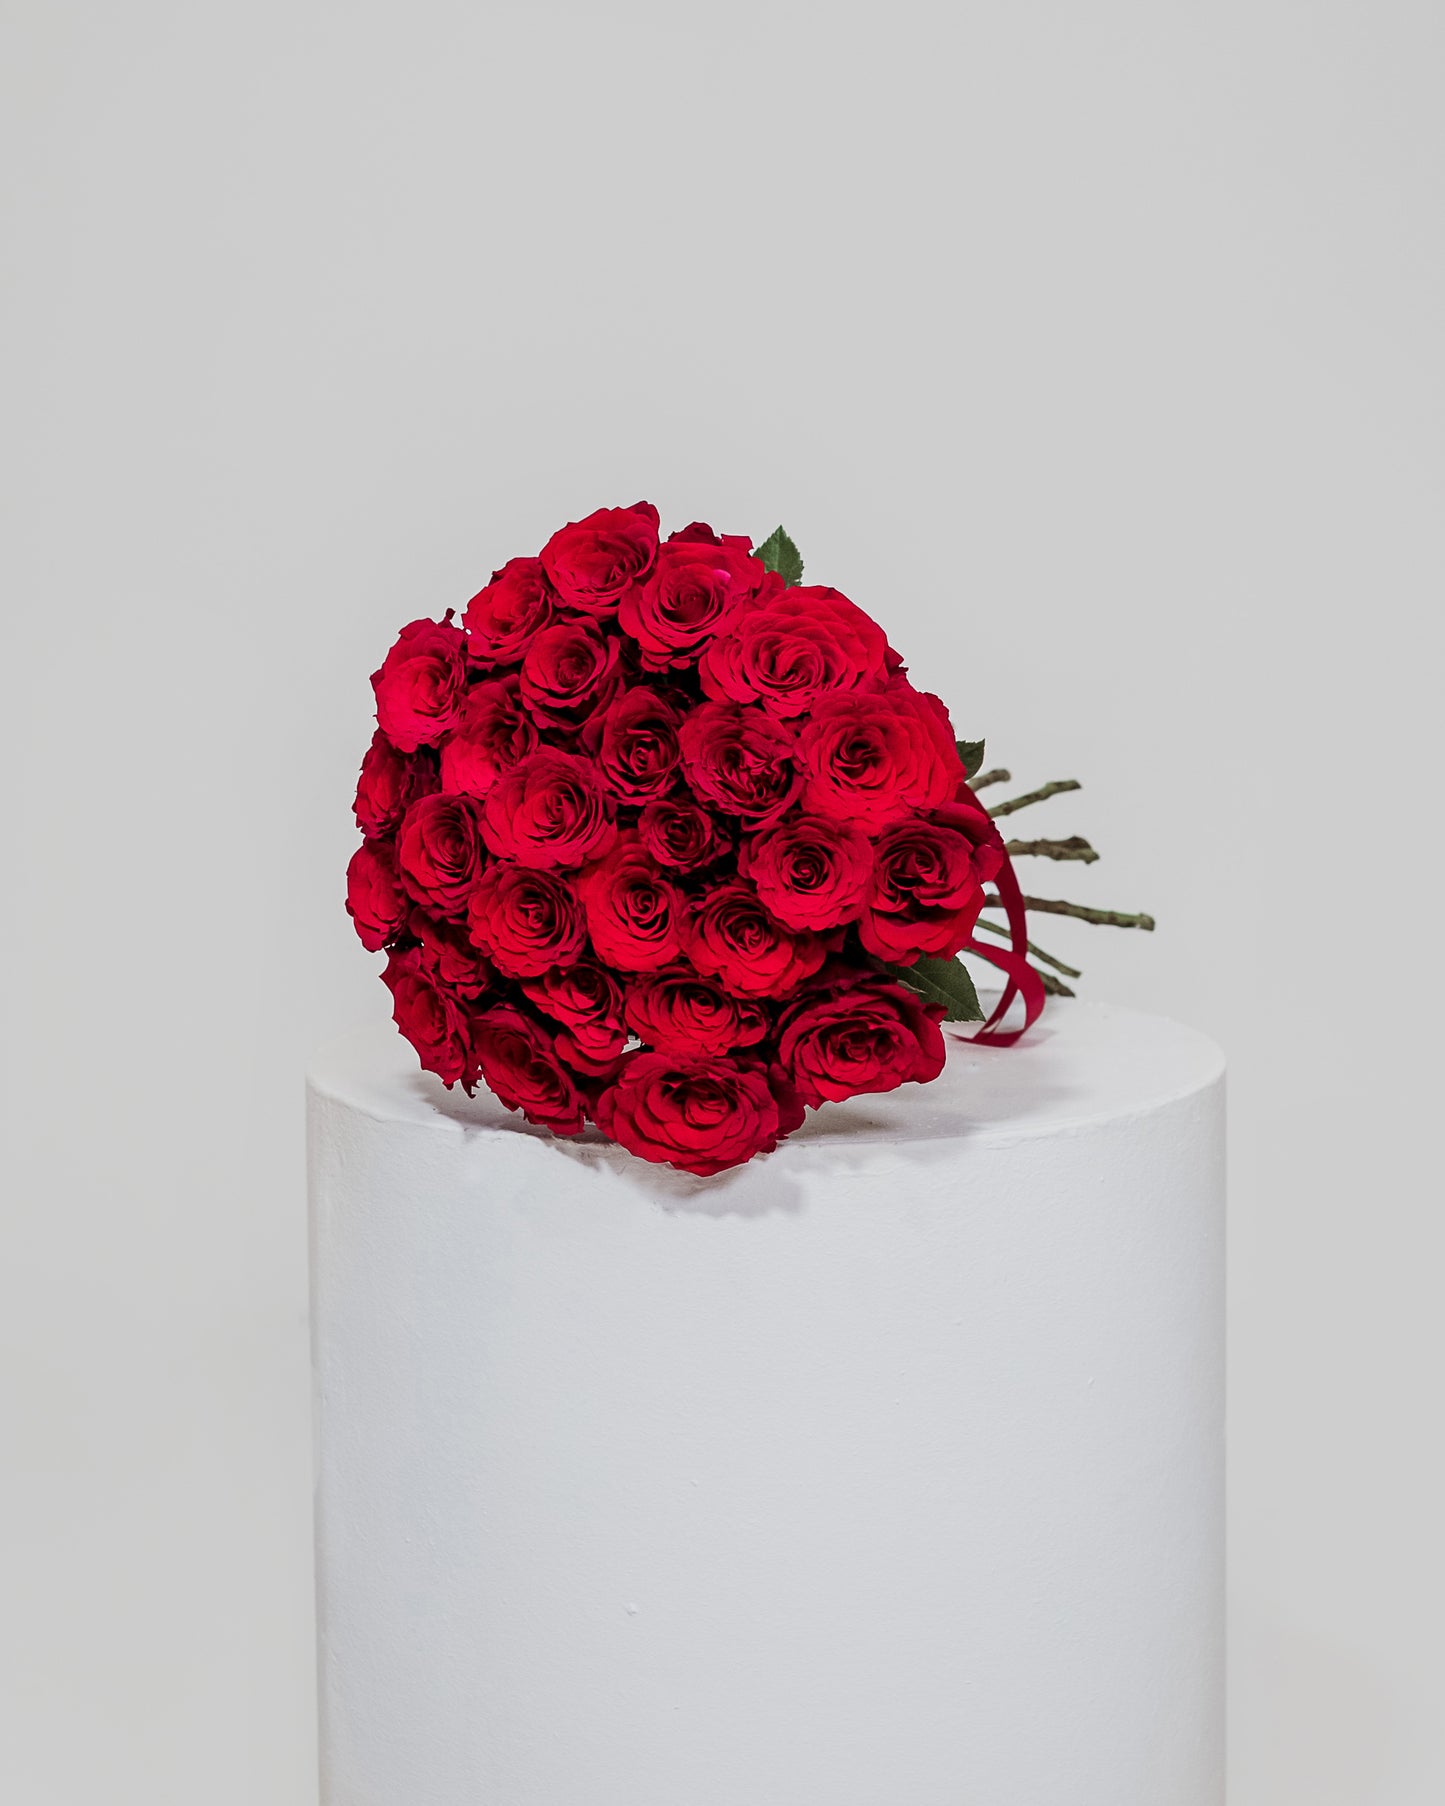 A stunning bouquet of 25 vibrant red roses, perfect for expressing love and romance on Valentine's Day.